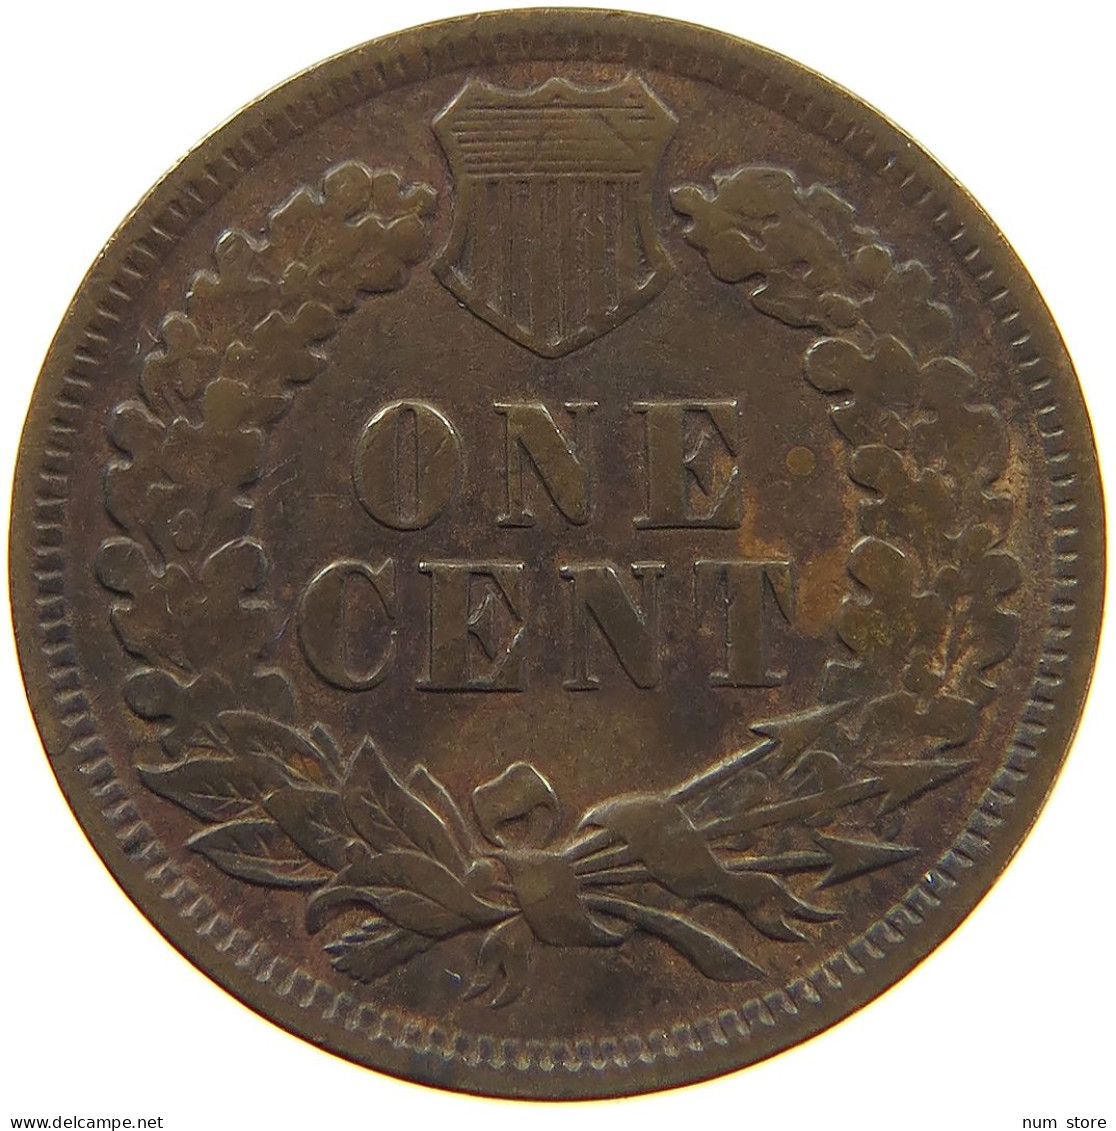 UNITED STATES OF AMERICA CENT 1895 INDIAN HEAD #c036 0345 - 1859-1909: Indian Head